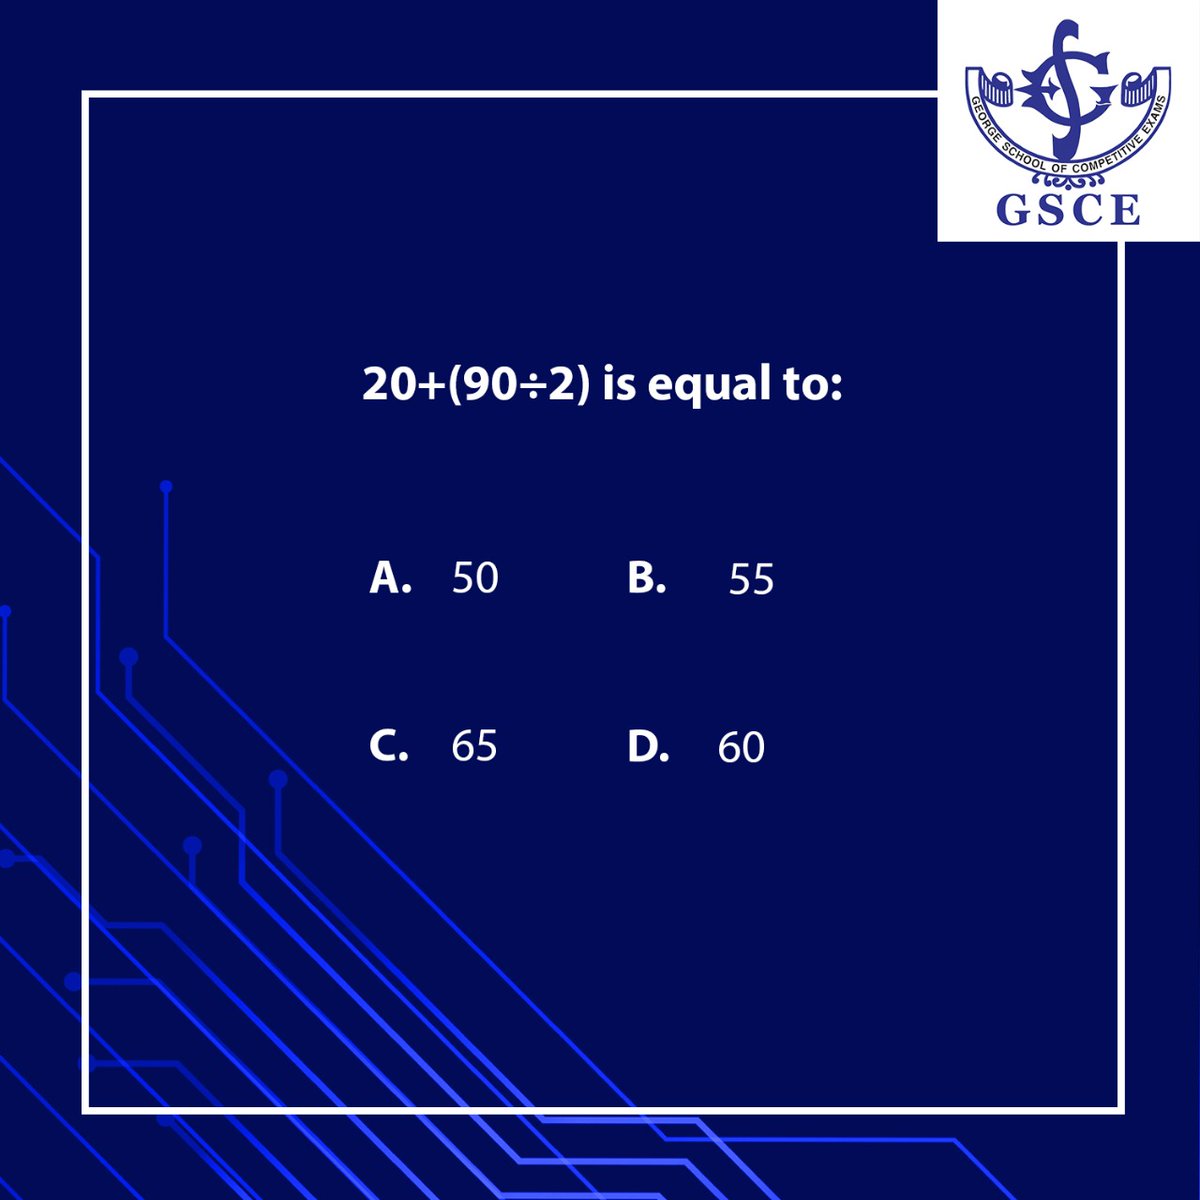 Gsce Answer The Following Question And Take Part In The Q A Session Crack All The Competitive Exams With Us Join Us T Co Oh3iuxgacu Call Mcq Gsce Georgeschoolofcompetitiveexams Exams21 Examchallenge